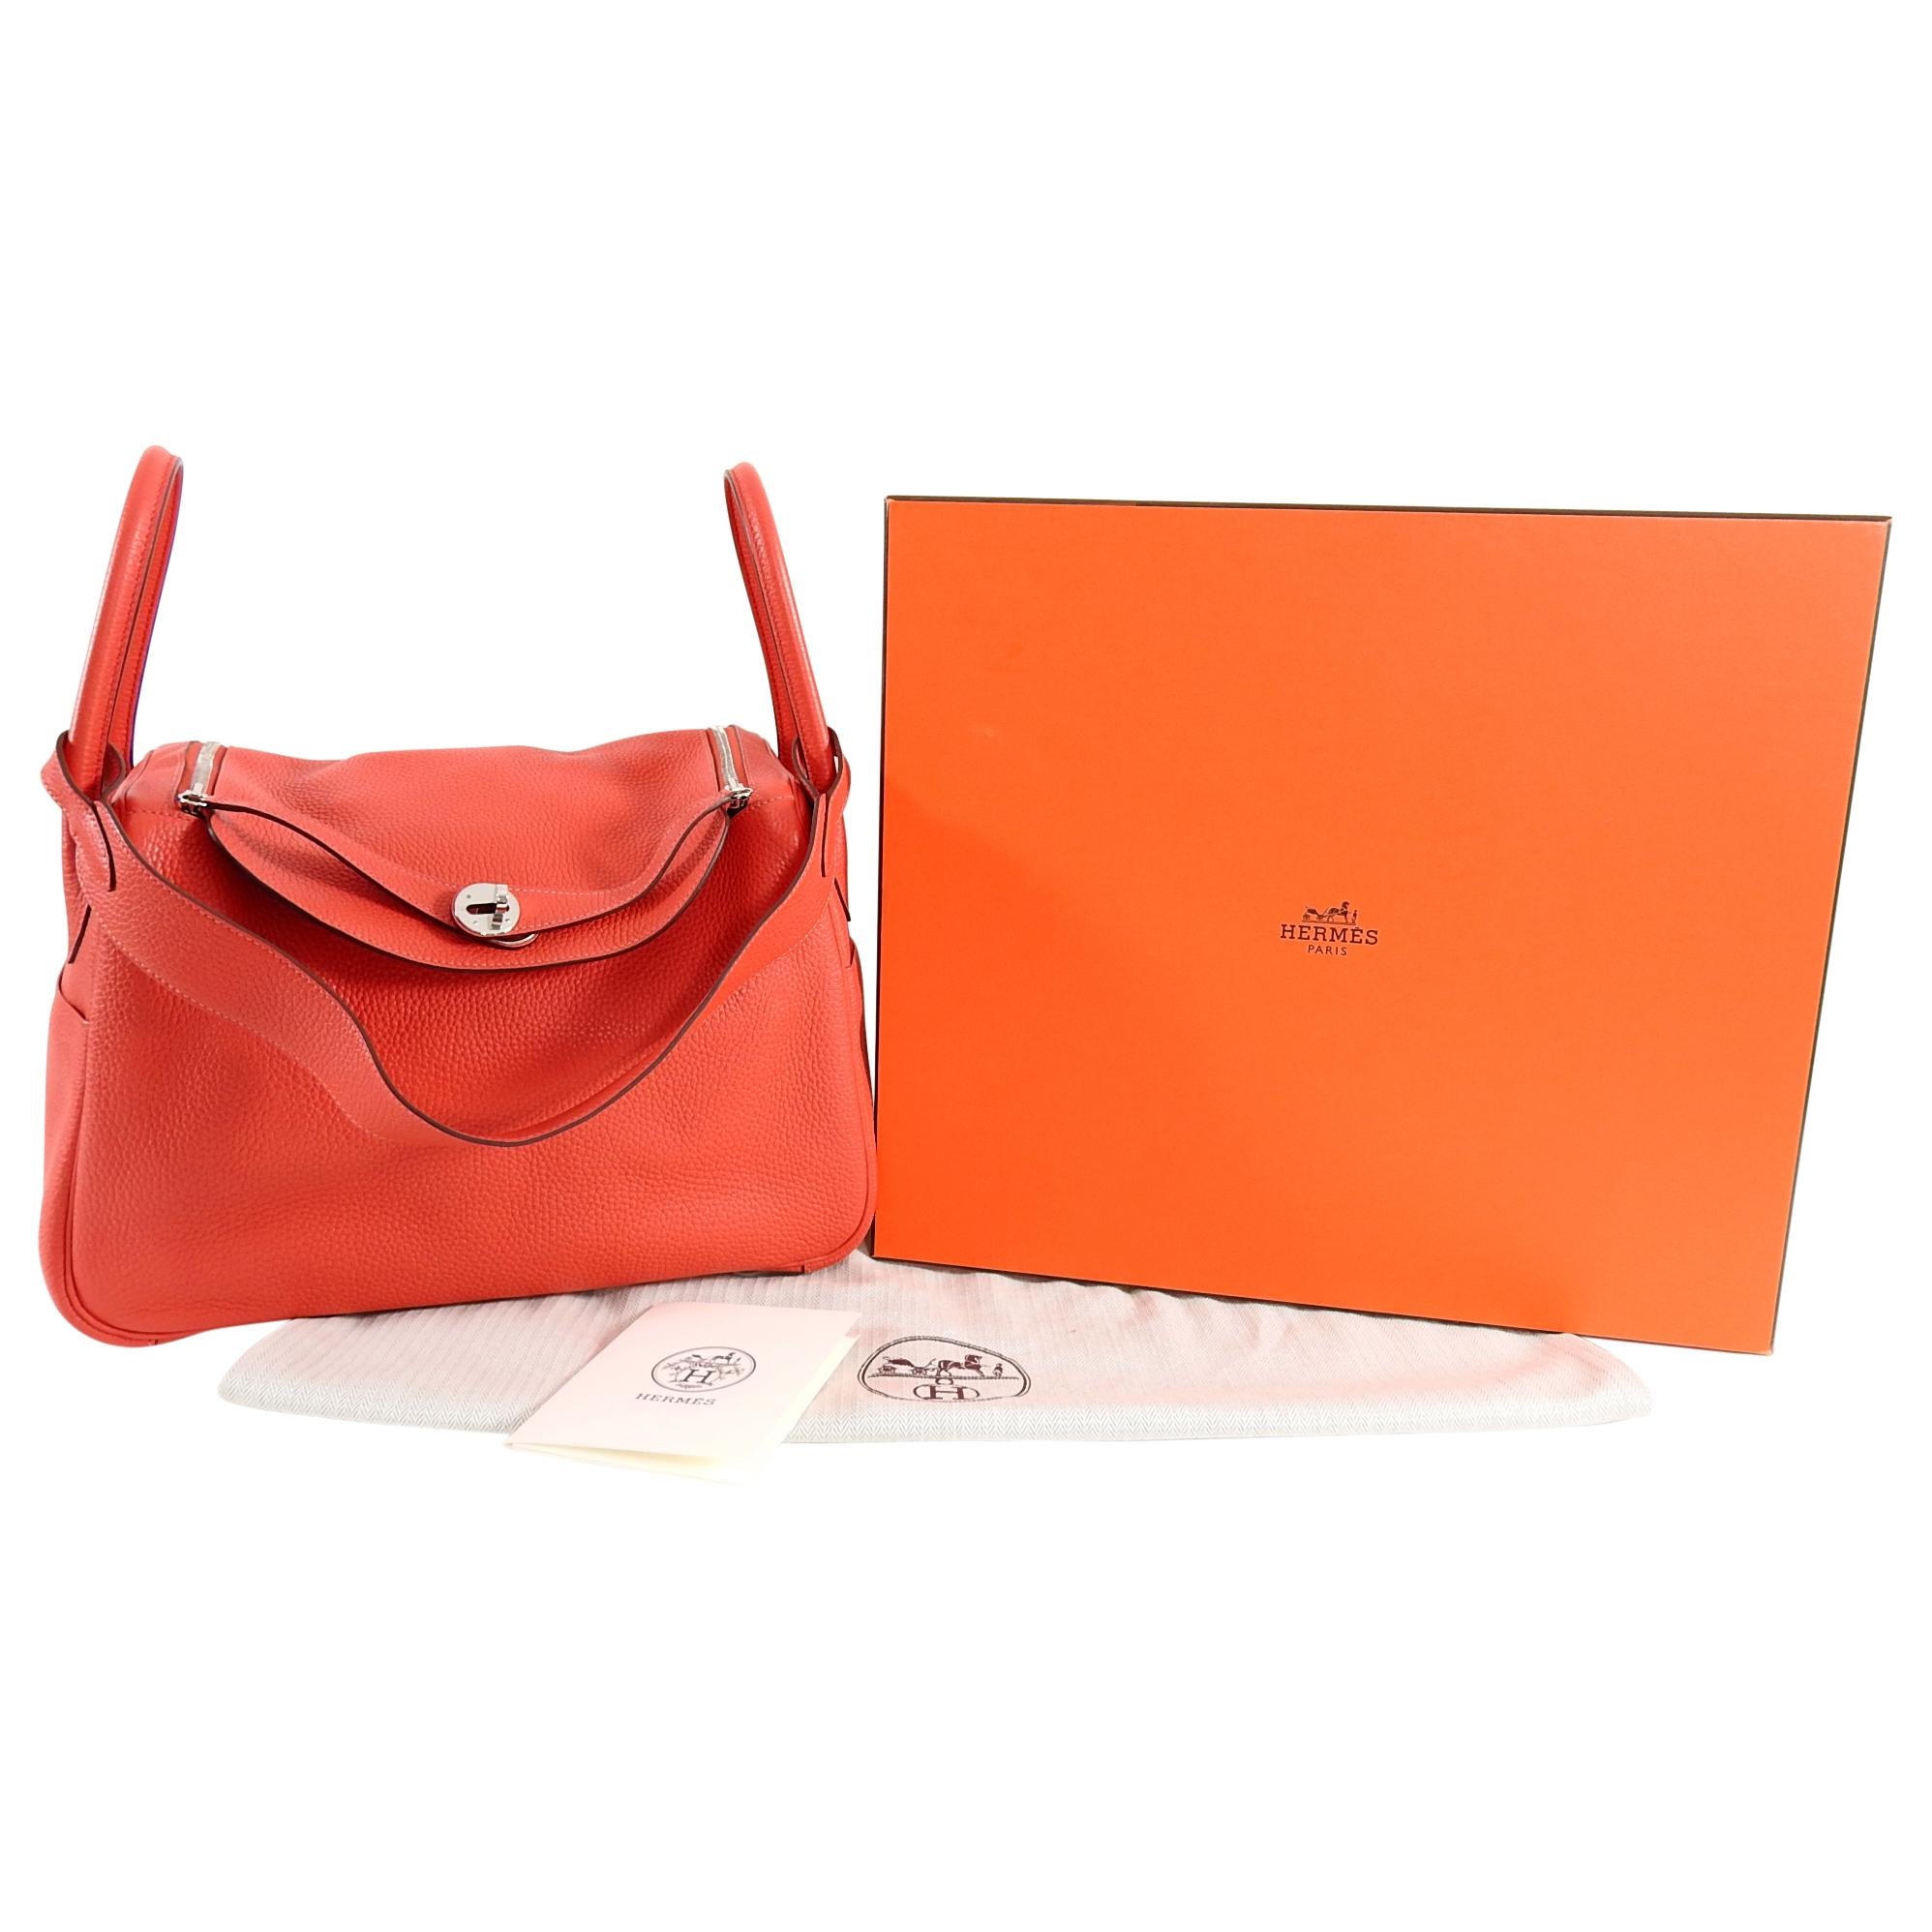 Hermes Lindy 34 Shoulder Bag in Taurillon Clemence Rouge Pivoine In Excellent Condition For Sale In Toronto, ON